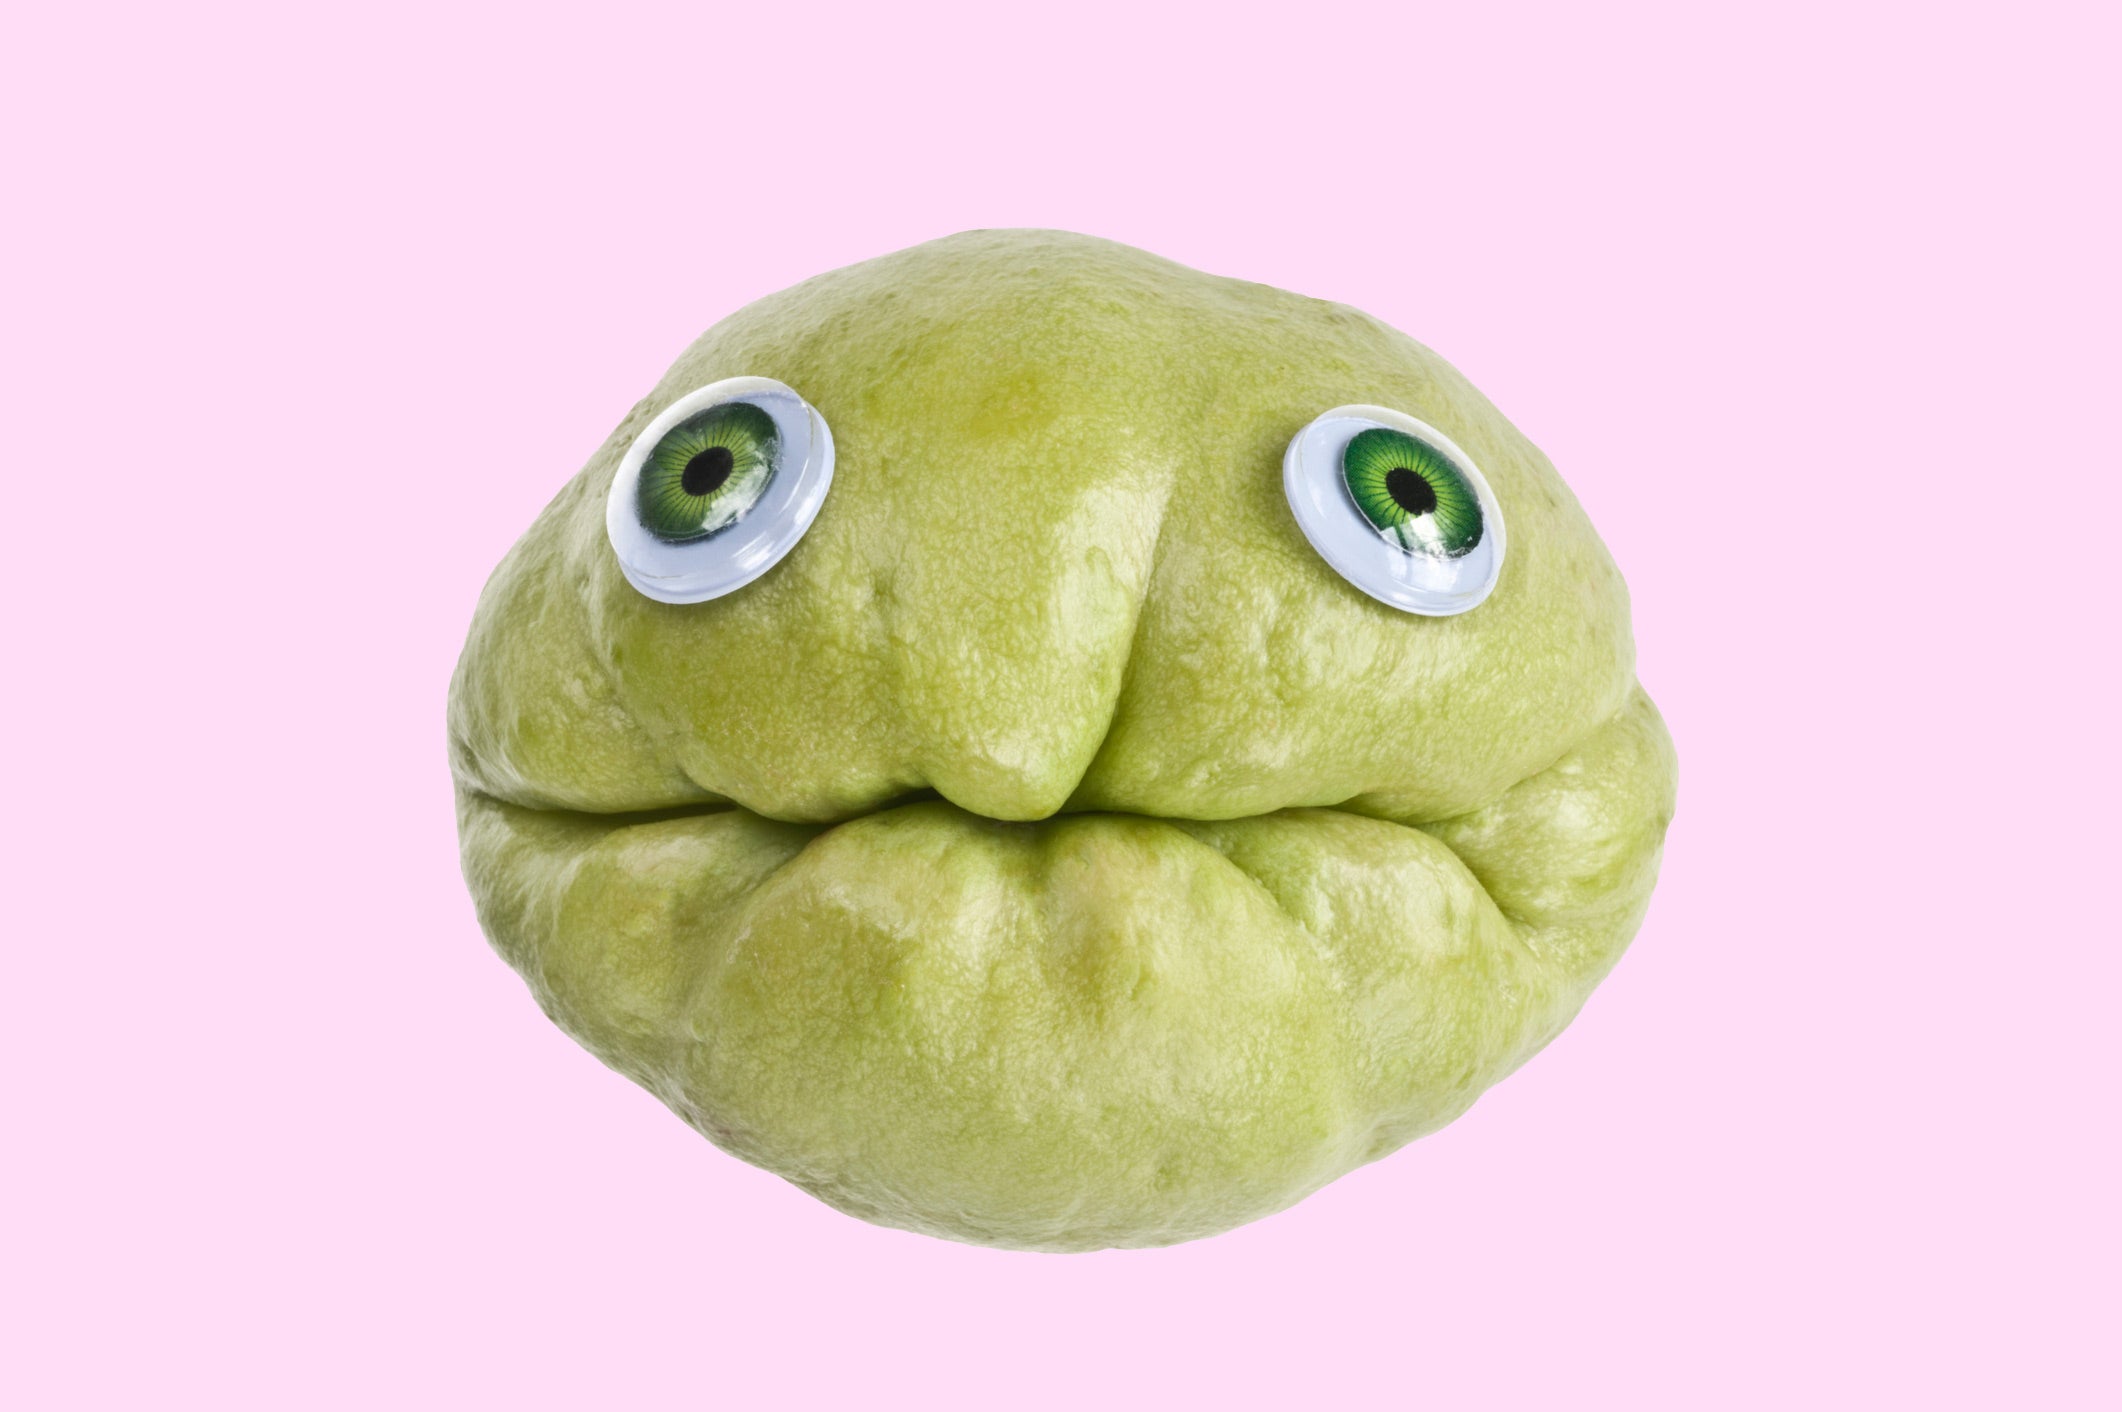 Funny pic of a chayote squash with googly eyes glued to it, angled so that the groove of the chayote looks like a mouth, on a solid pink background